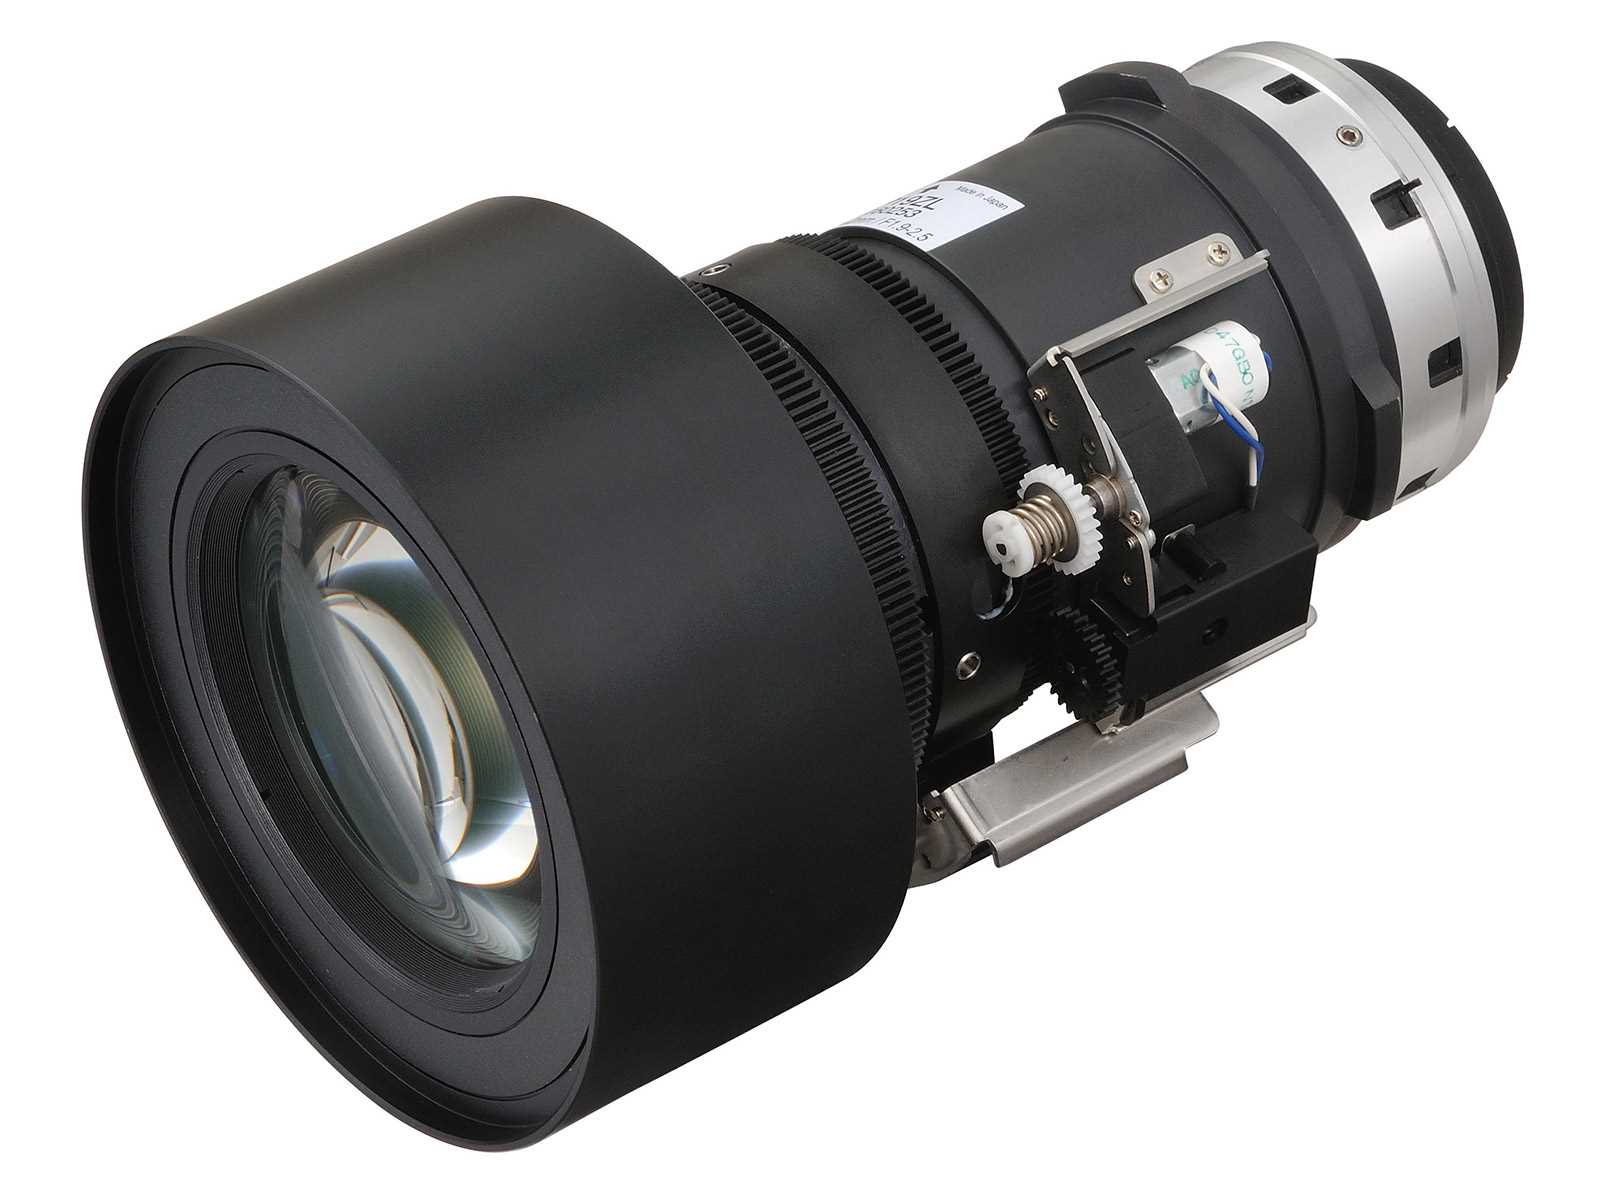 NEC Objektiv NP19ZL Long zoom lens for PX Series (excl. PX602UL/PX602WL) - 2.22-3.67:10 